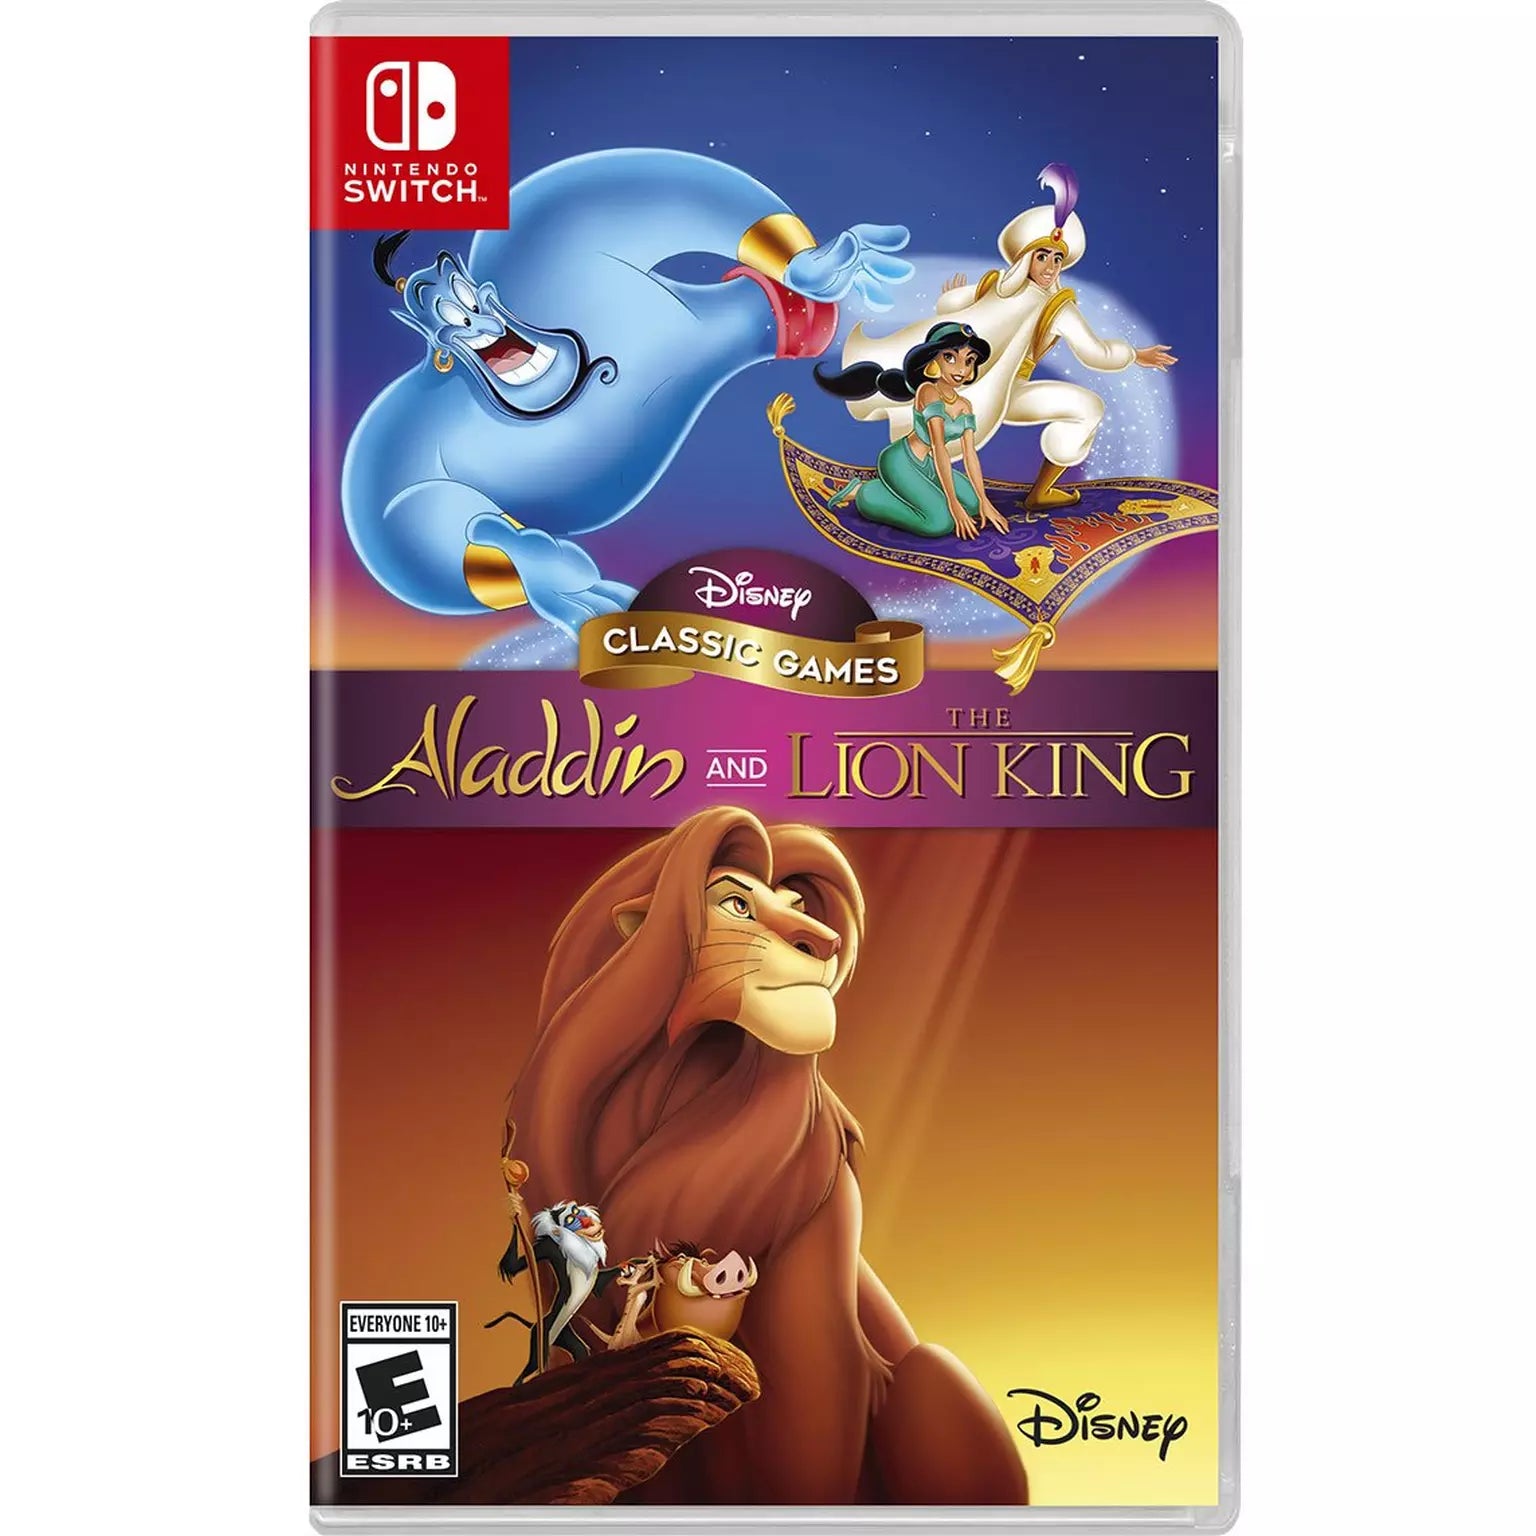 Official Disney Classic Games Aladdin and The Lion King - Nintendo Switch Replacement case